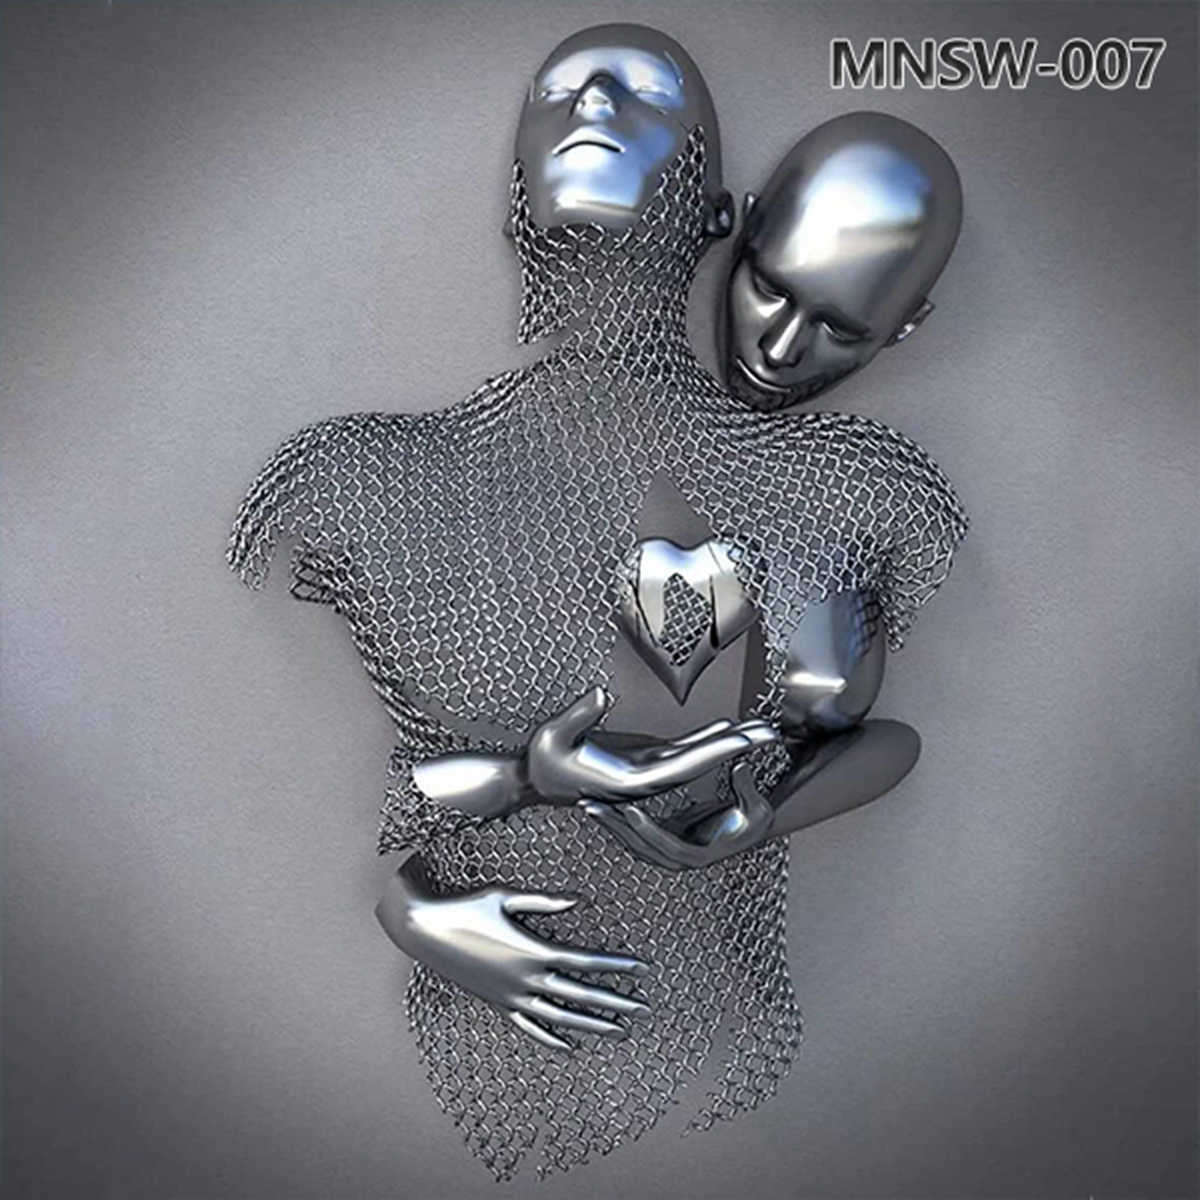 Hot Sale Metal Figure Body Sculpture Hugging for Wall Decor MNSW-007